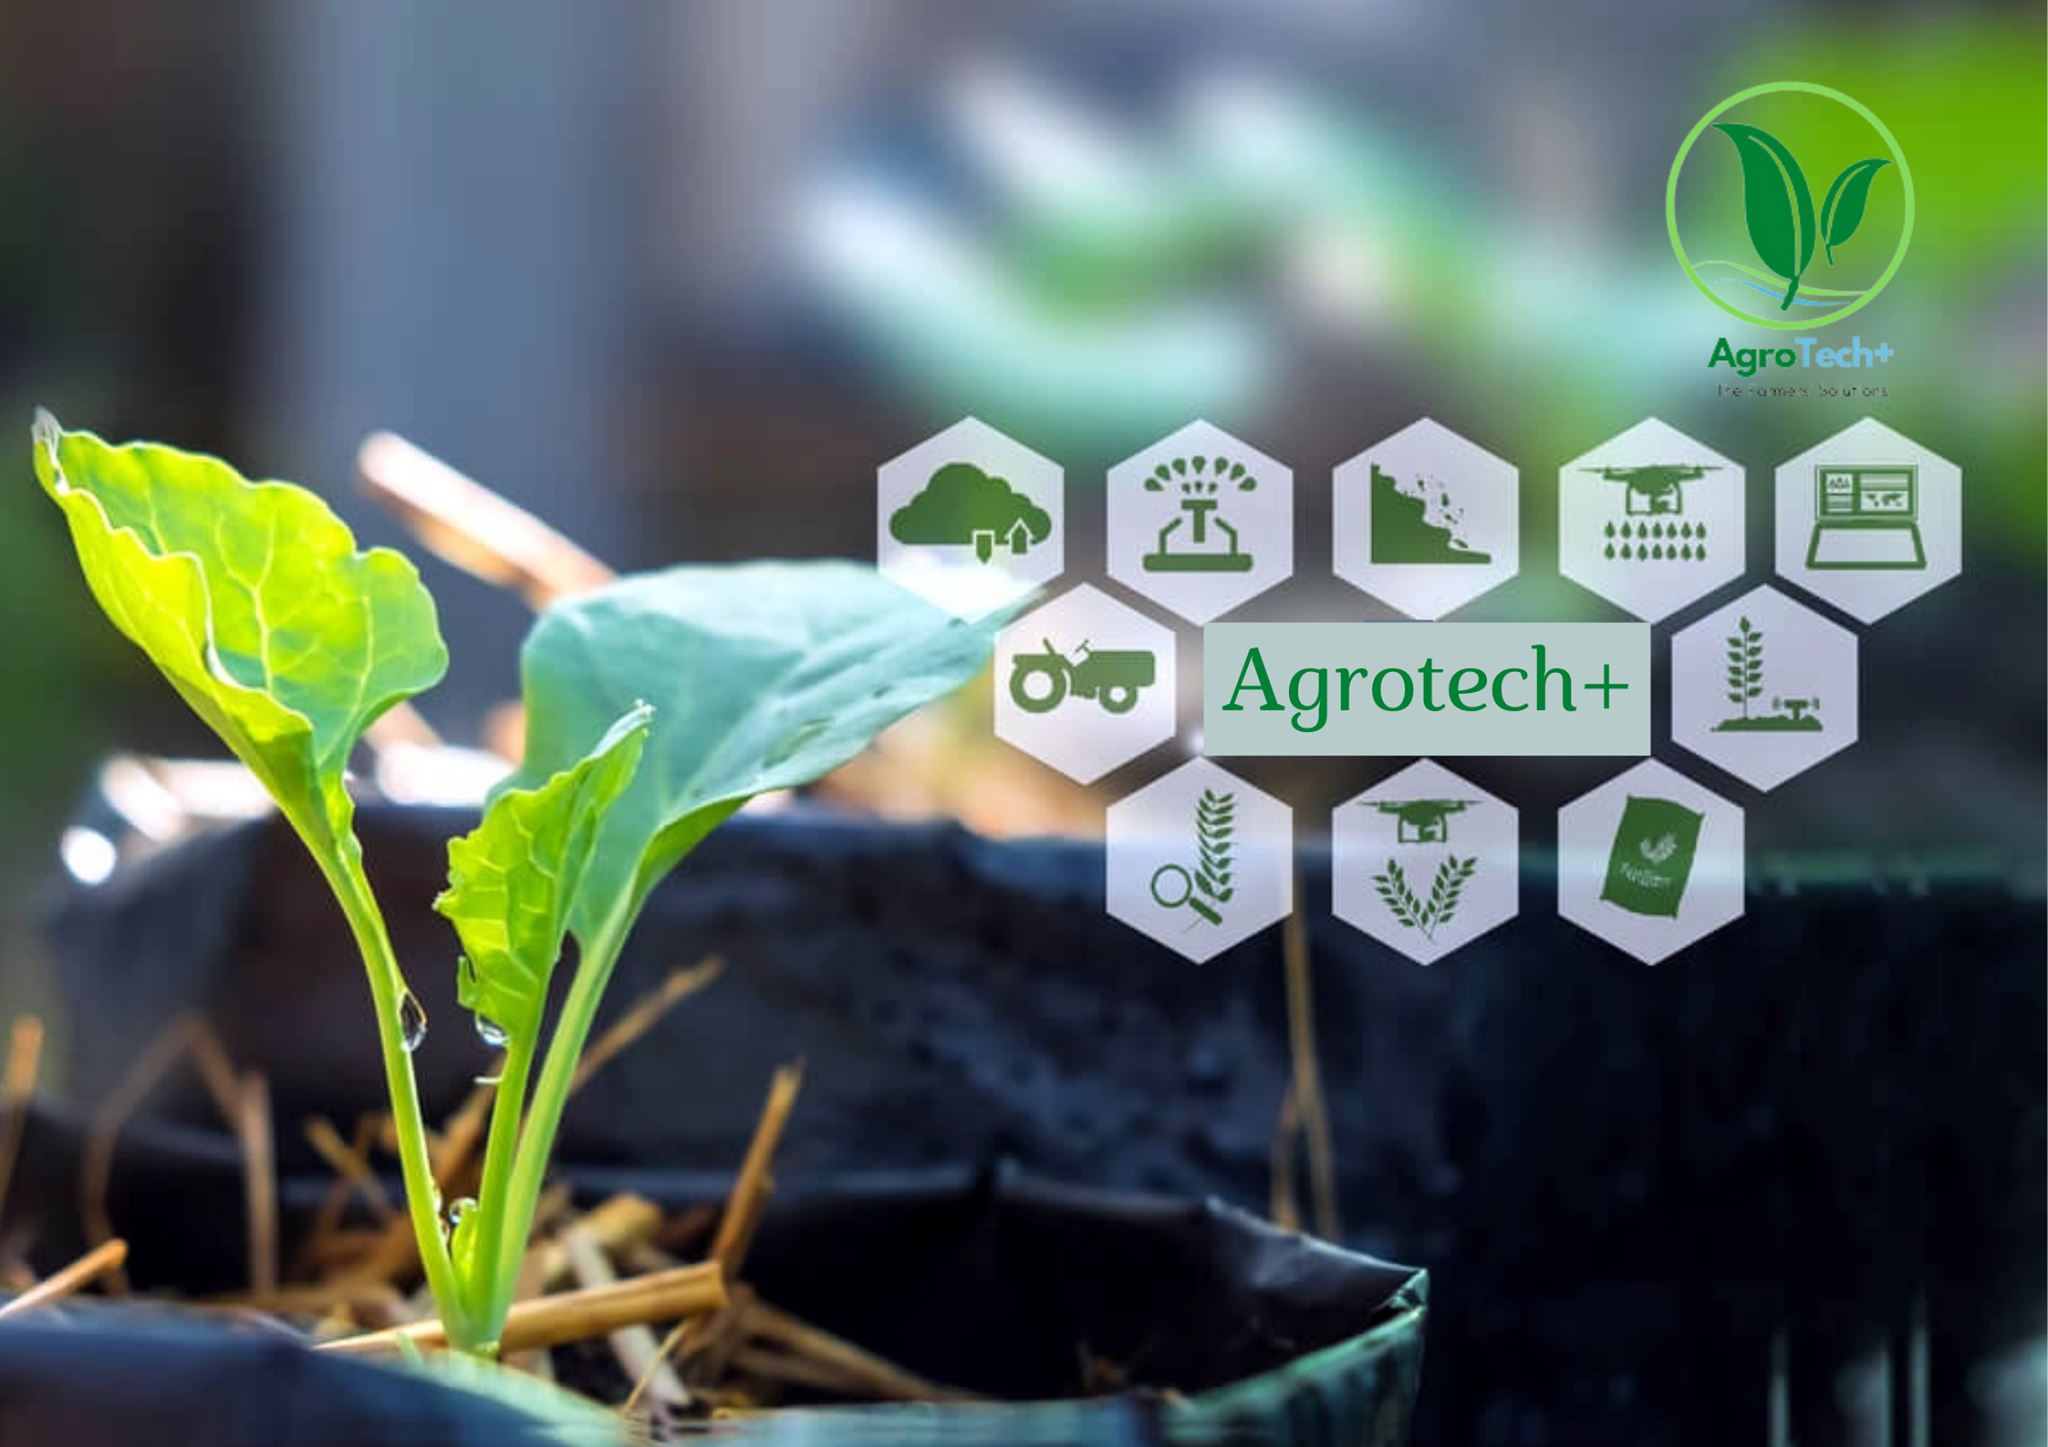 Agrotech+